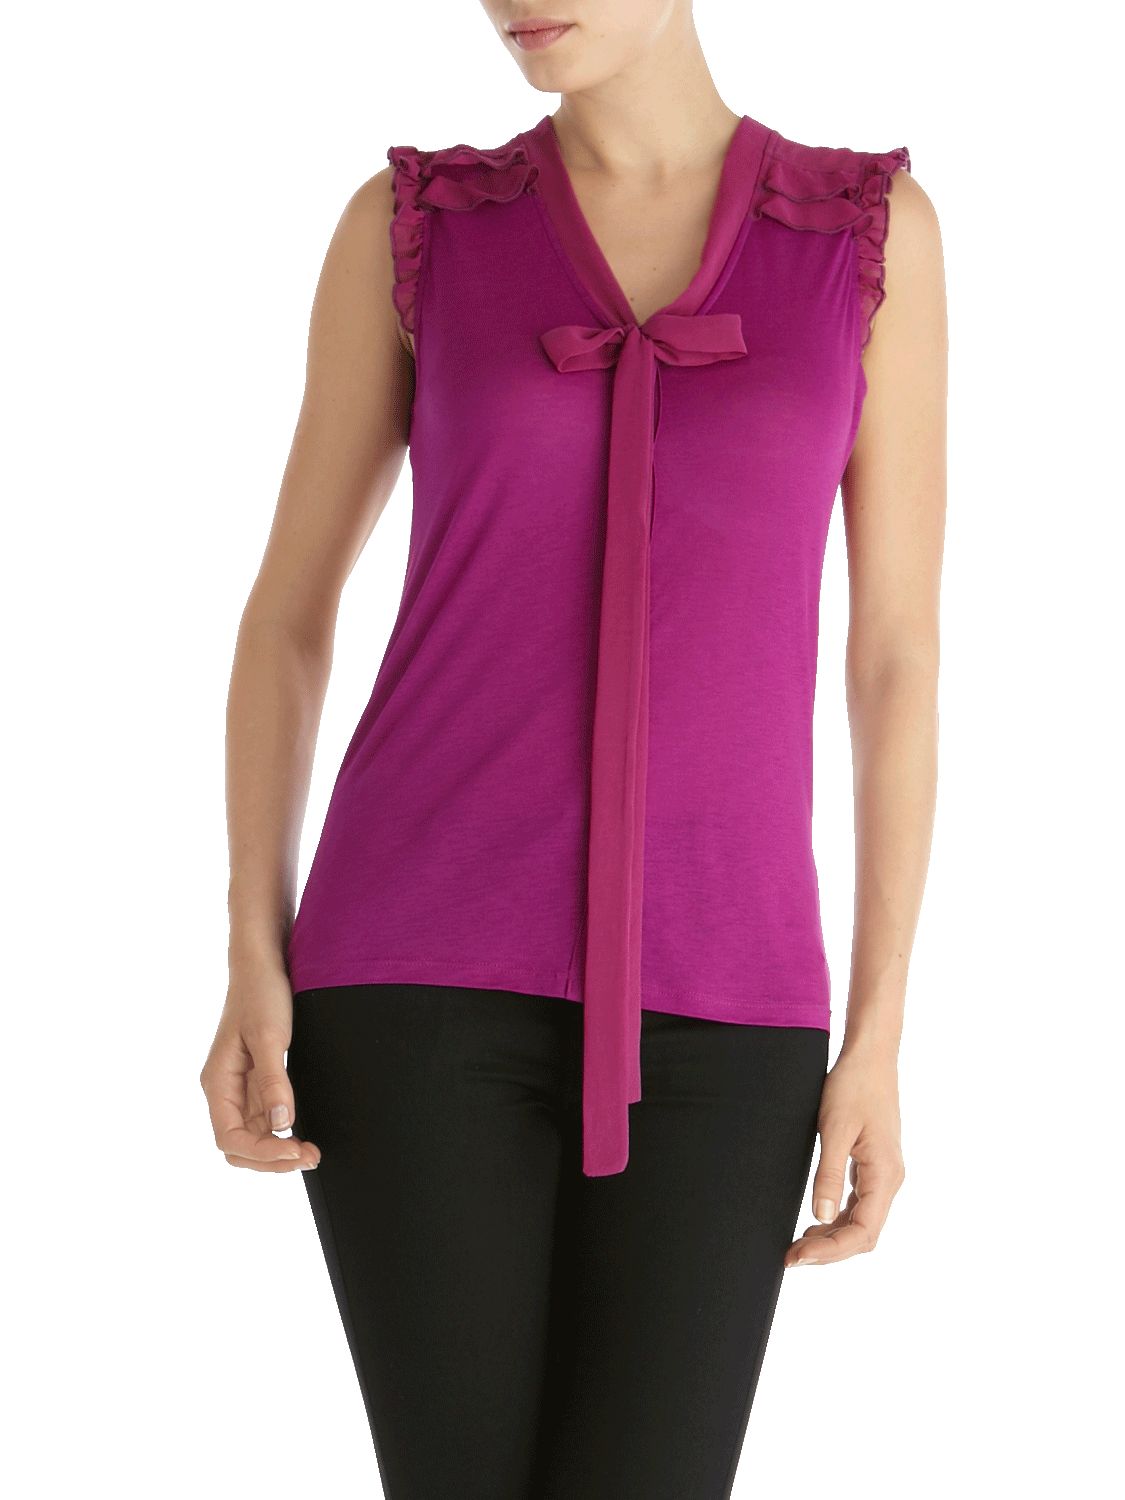 Oasis Frill Front Neck Tie Blouse, Magenta